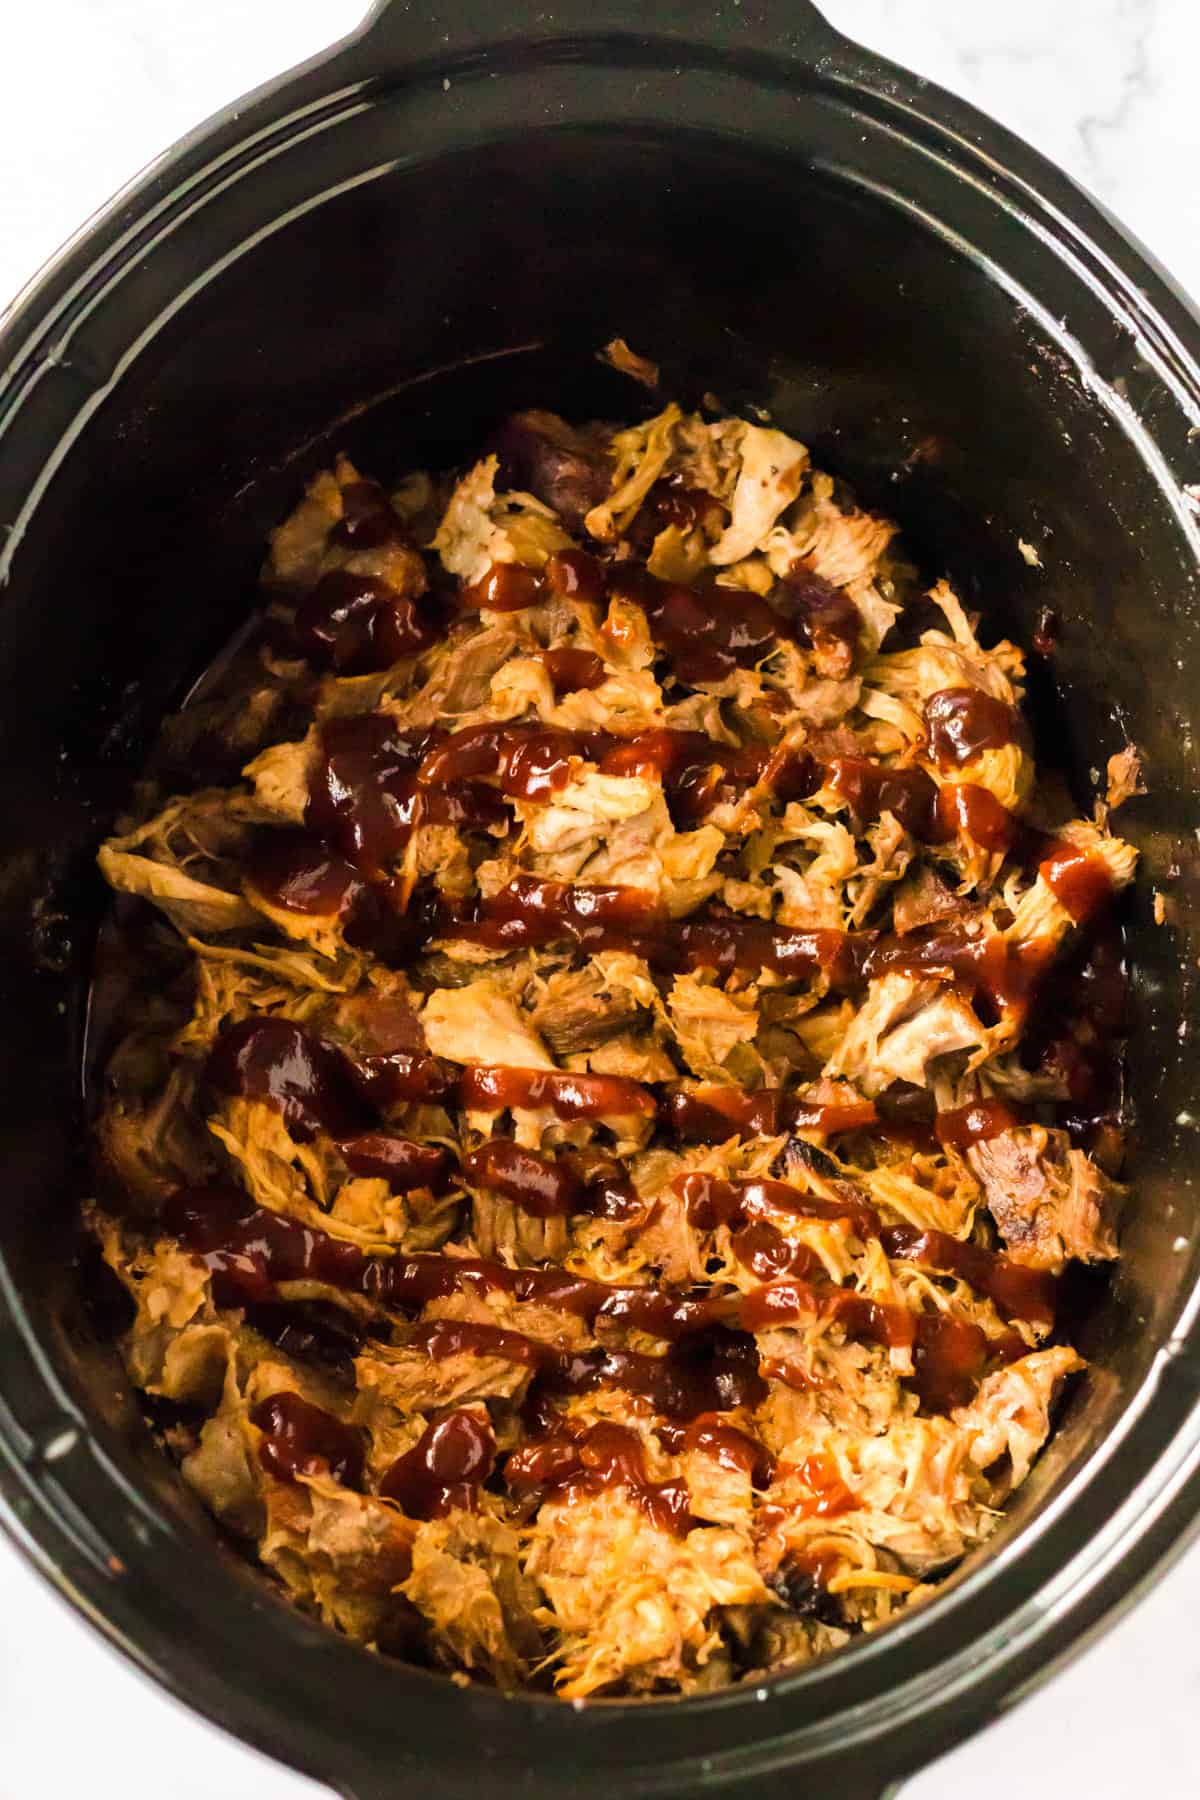 Root beer pulled pork with BBQ sauce drizzled over the top in the slow cooker.